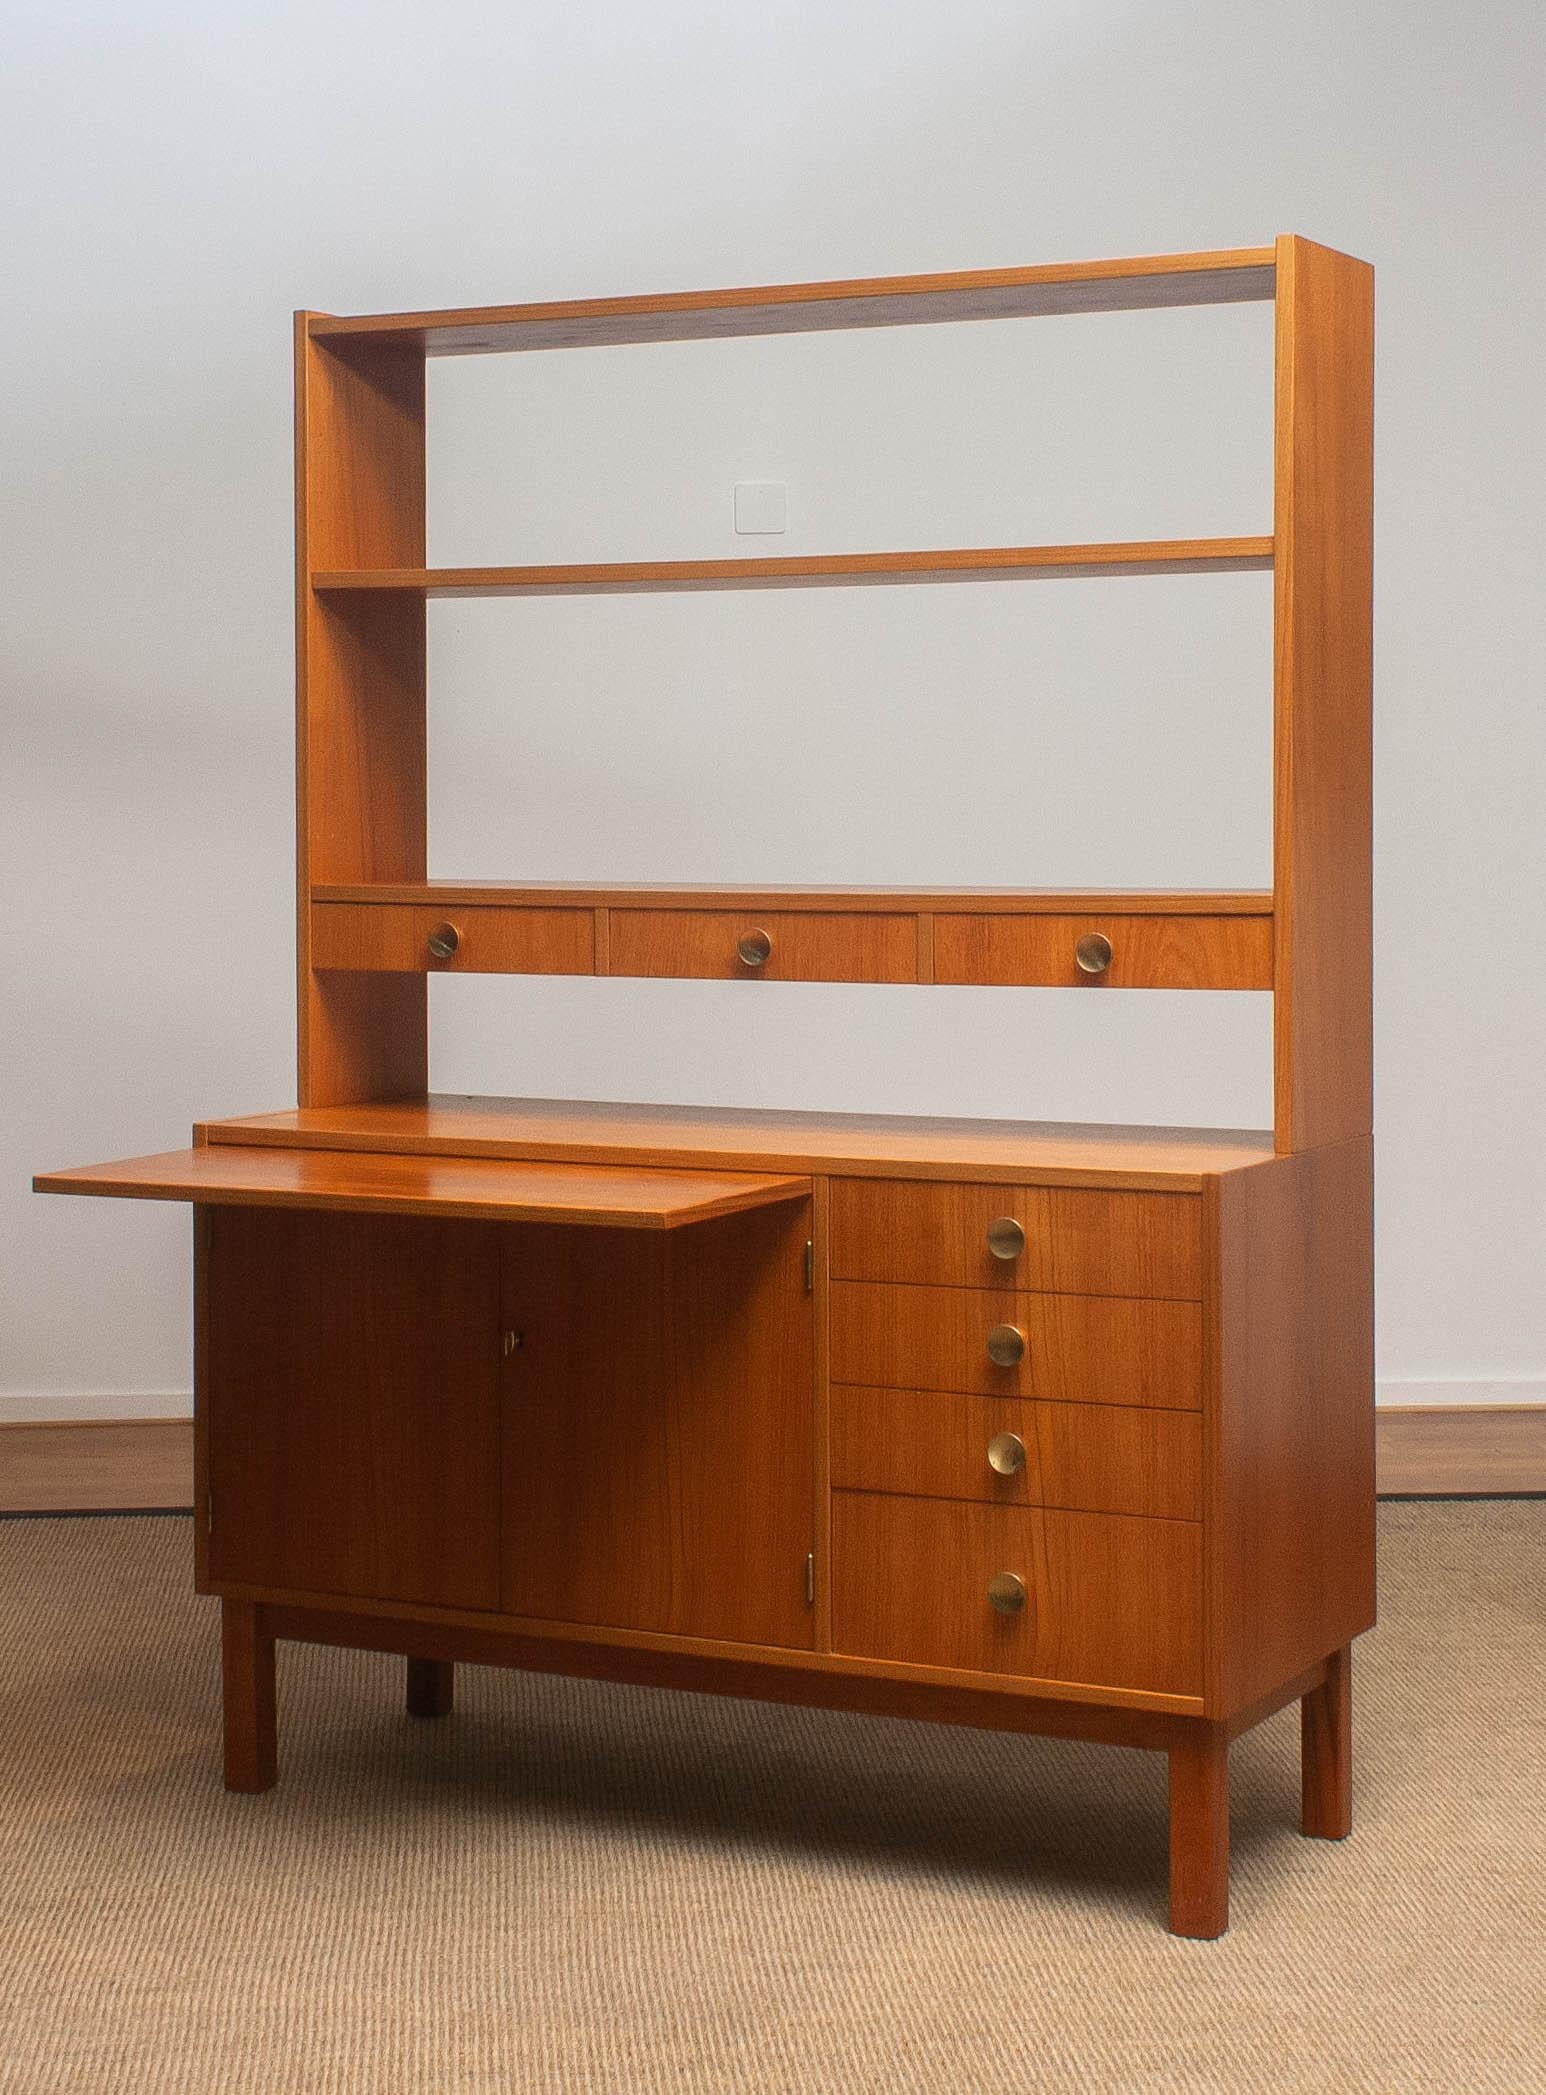 1950s Teak Veneer and Brass Bookshelves Cabinet with Writing Space from Sweden 6